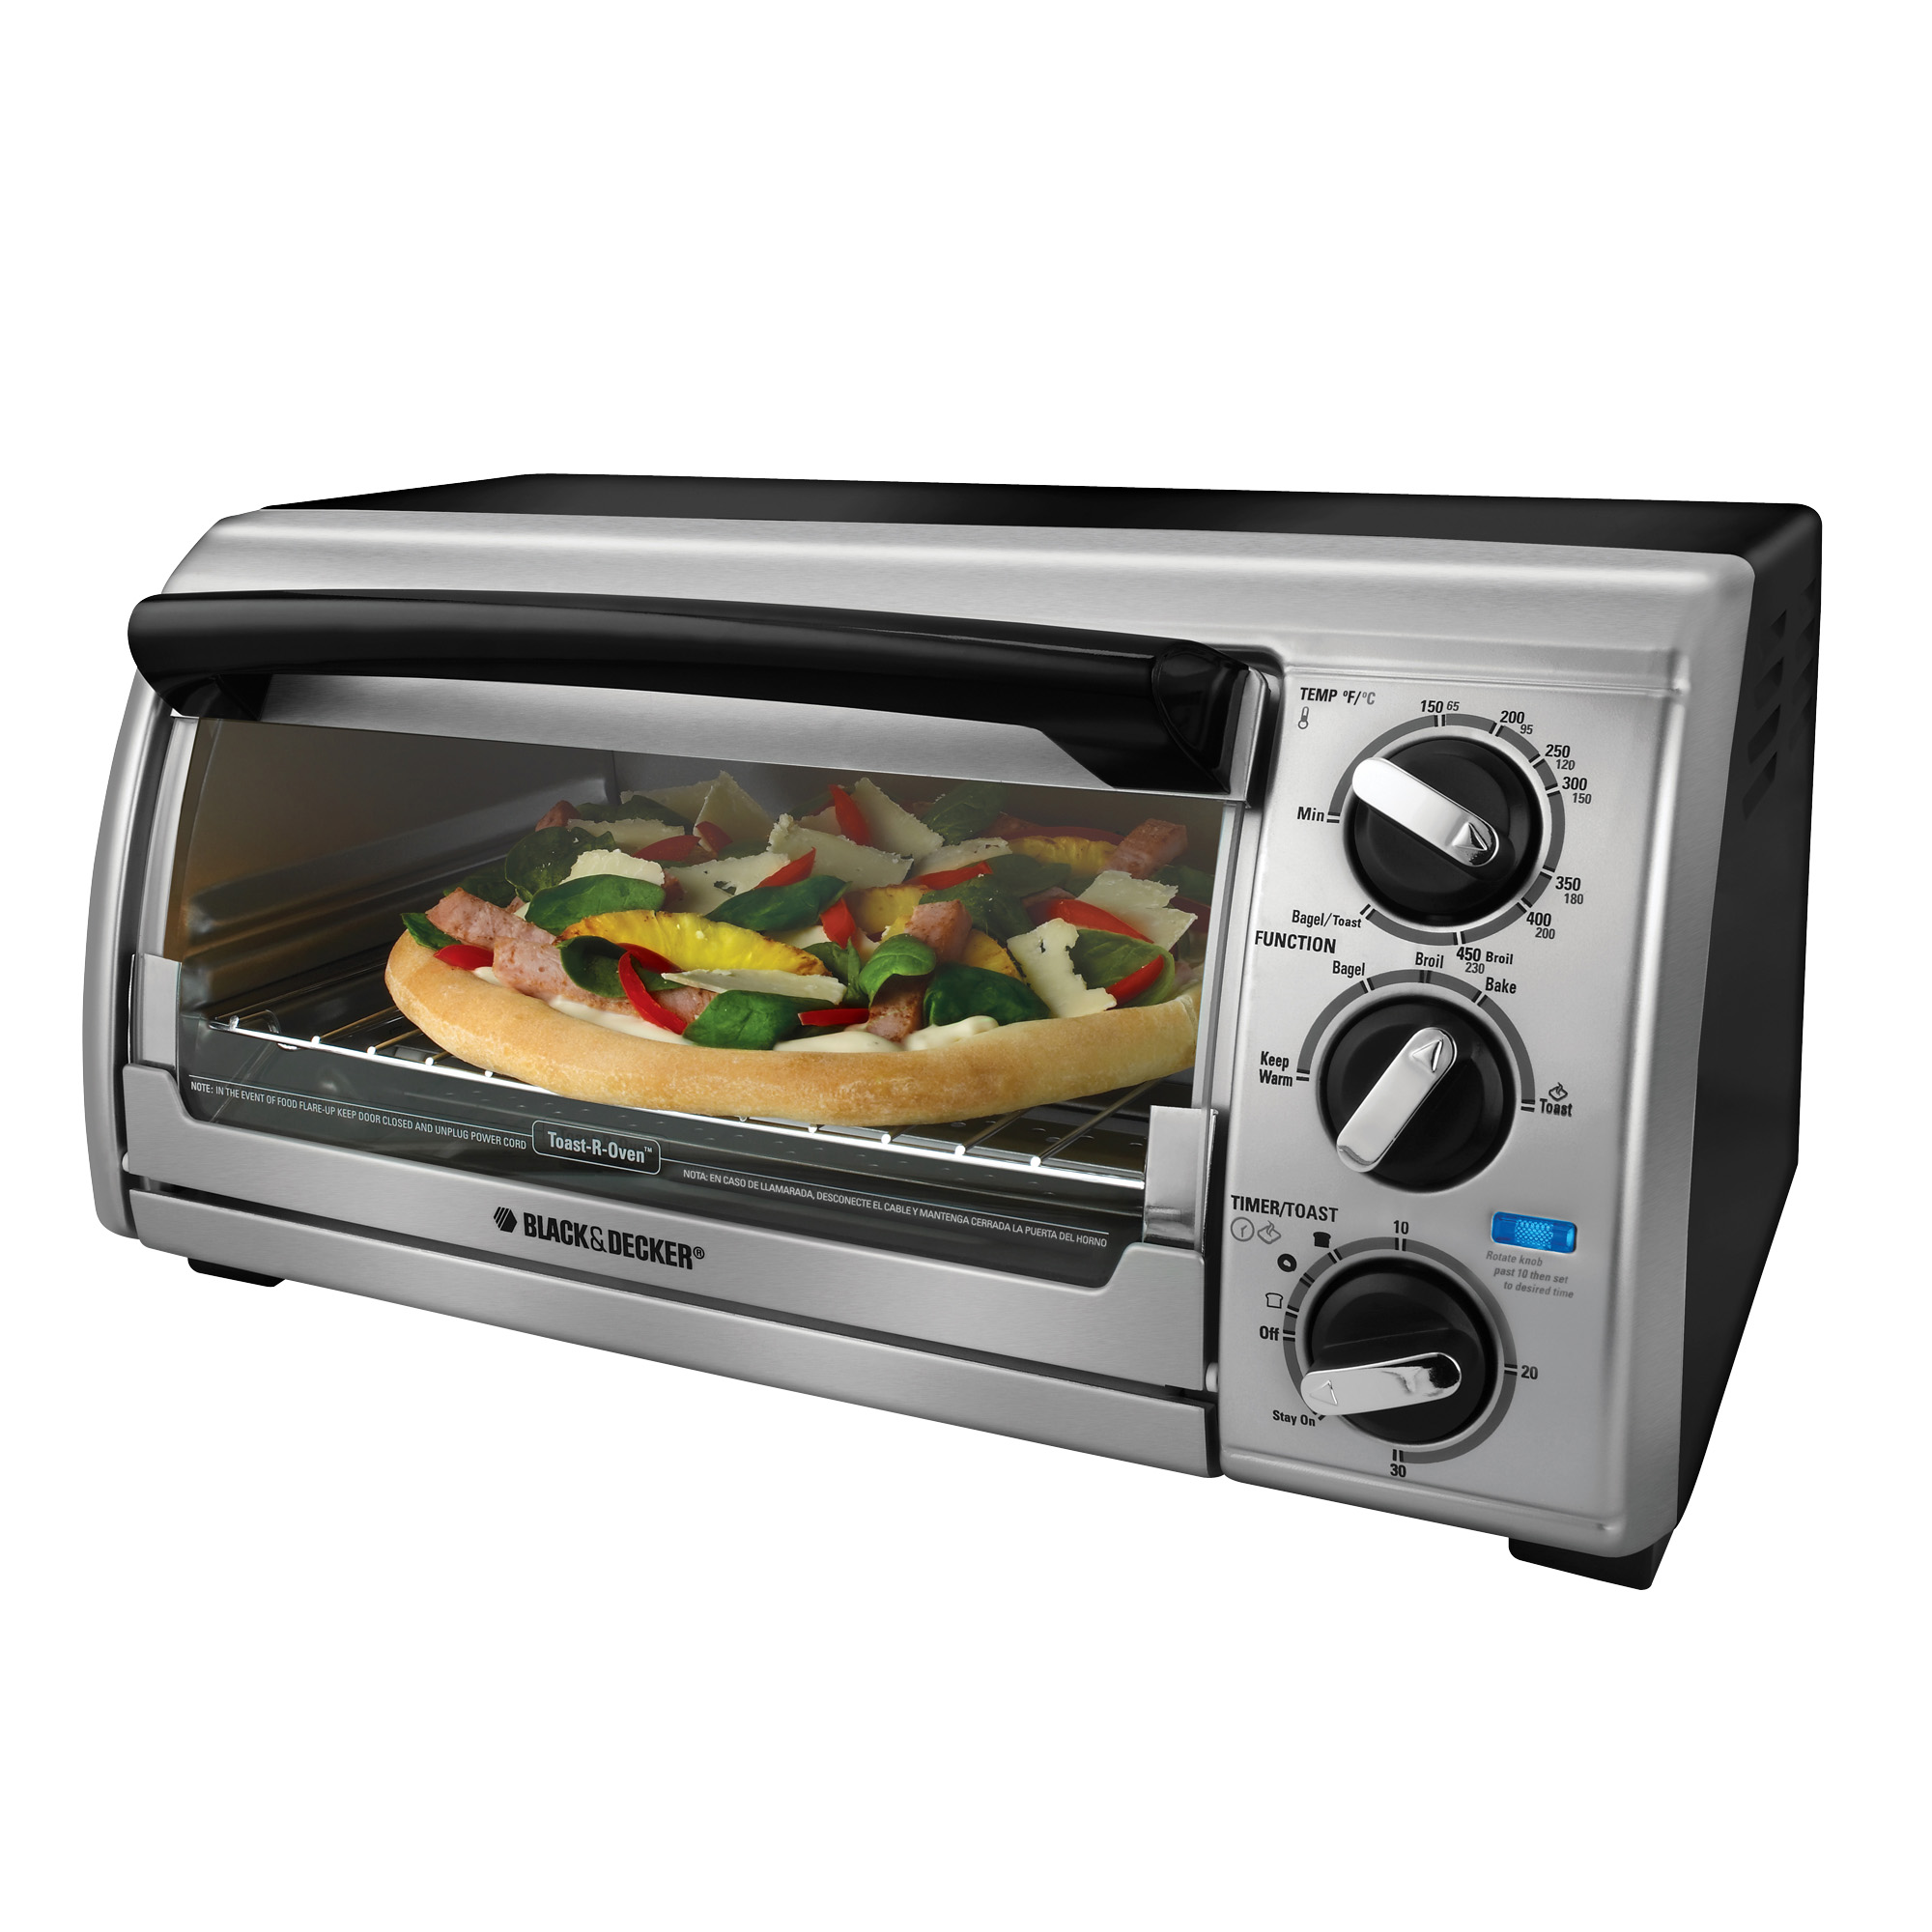 https://s7cdn.spectrumbrands.com/~/media/SmallAppliancesUS/Black%20and%20Decker/Product%20Page/cooking%20appliances/convection%20and%20toaster%20ovens/TRO480BS/TRO480BS%20copyHR.jpg?h=2000&la=en&w=2000